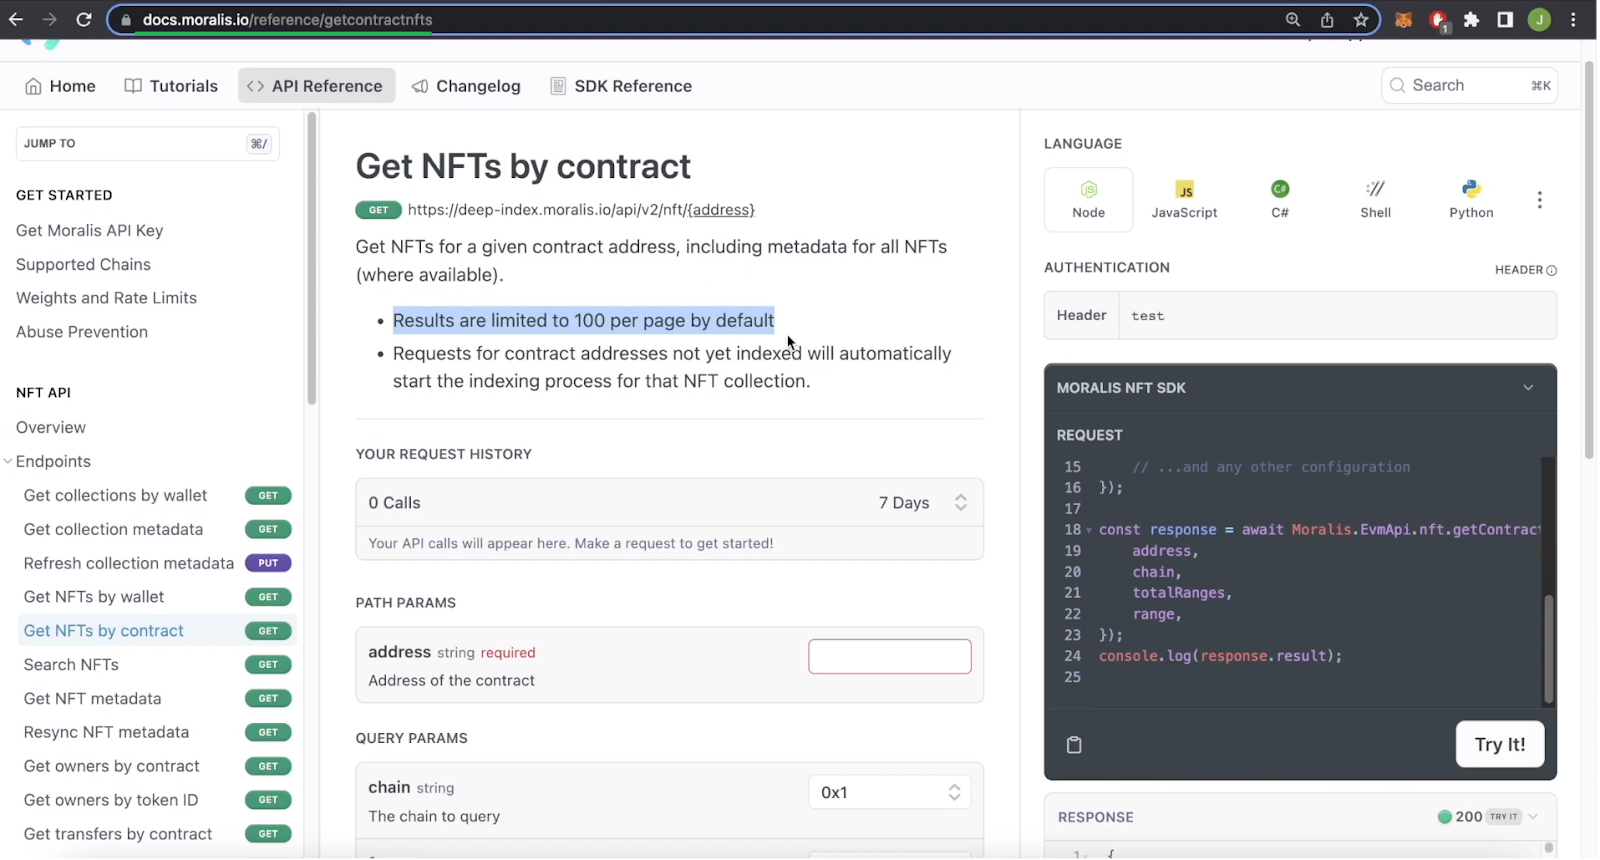 Showing all the information on the get NFTs by contract documentation page, including code snippets.